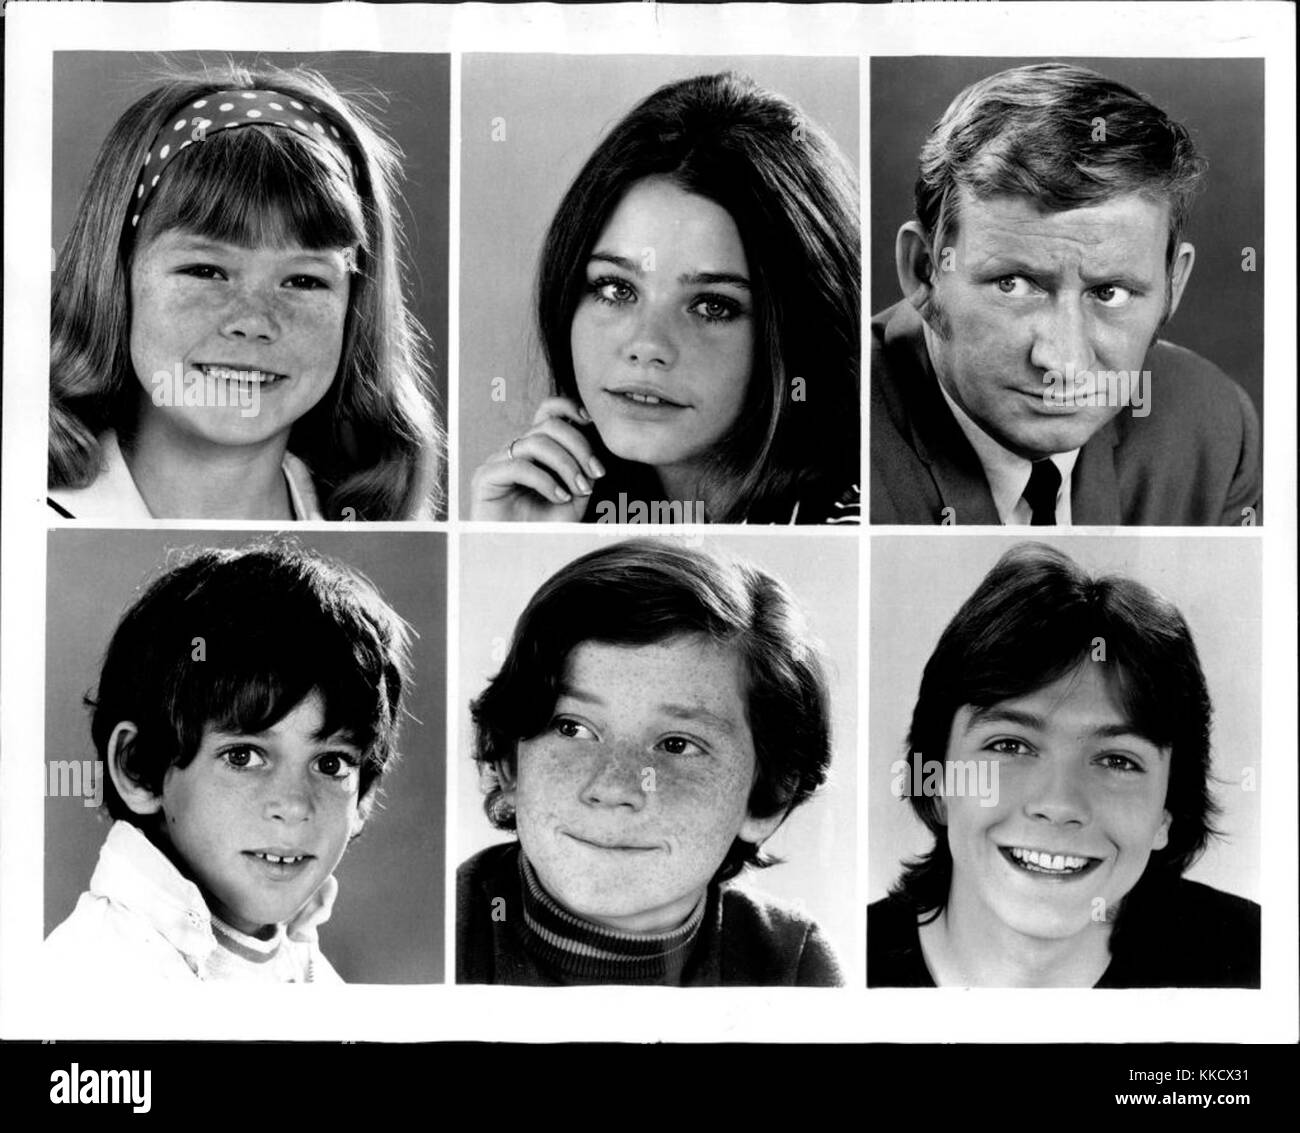 FEB 1 1971  'The Partridge Family' (Top row - left to right) Suzanne Crough as Trach, Susan Dey as Laurie, Dave Madden as their business agent, Reuben, and (Bottom - left to right) Jeremy Gelbwaks as Christopher, Danny Bonaduce as Danny, and David Cassidy as Keith.  'The Partridge Family' which stars Shirley Jones as their mother, is aired on Fridays, (8:30-9:00 p.m. EDT). The Partridge Family Cast 1970 Stock Photo